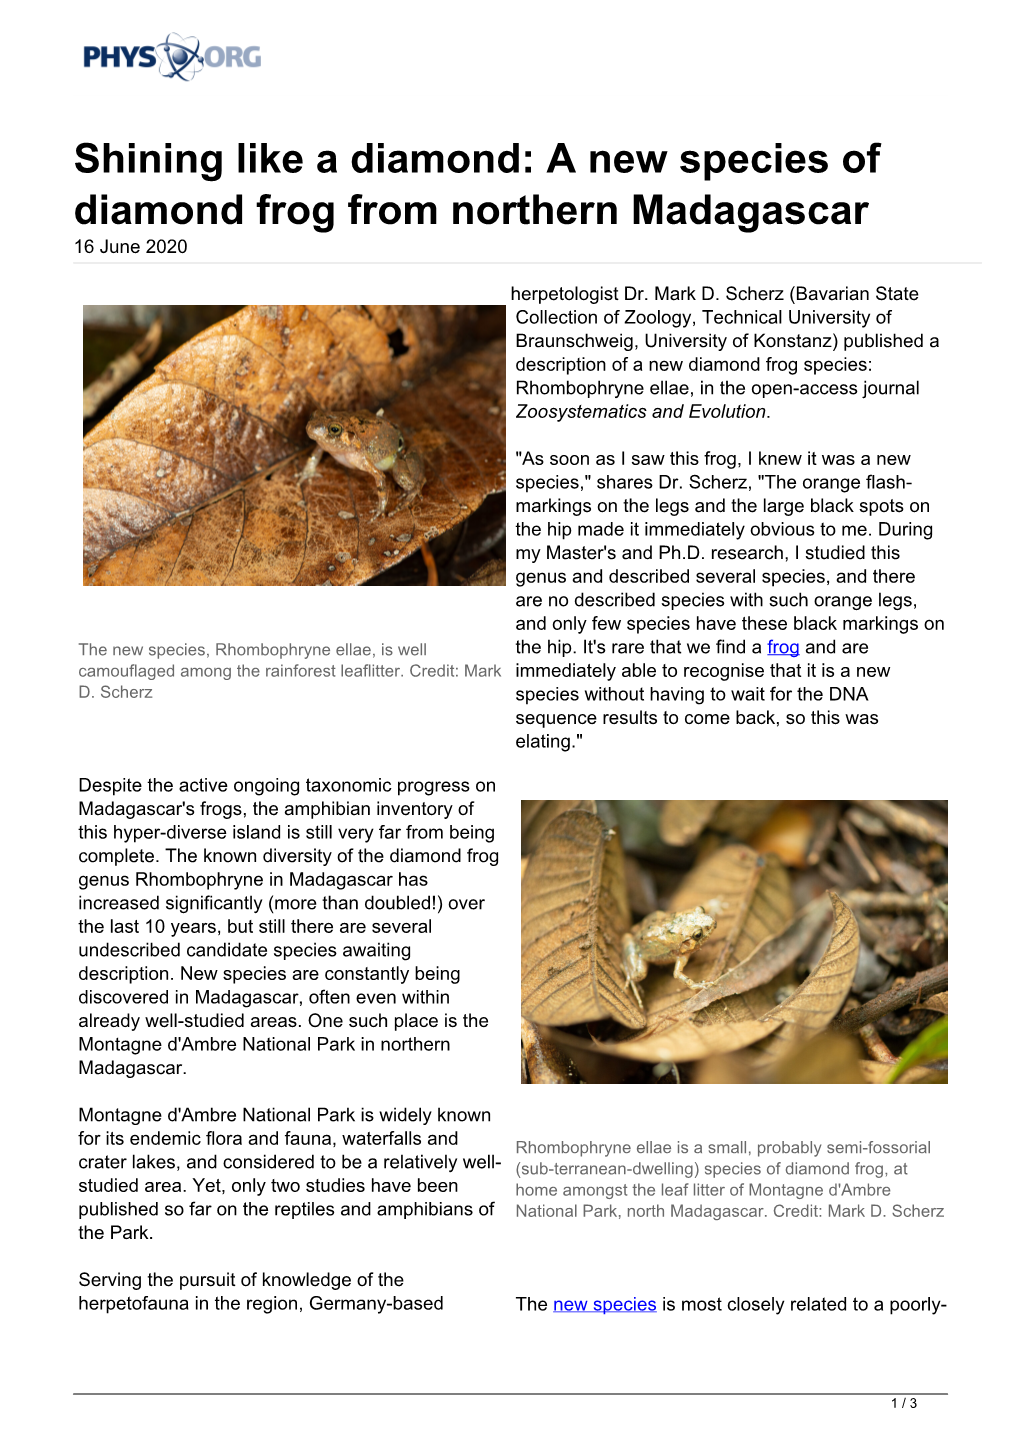 A New Species of Diamond Frog from Northern Madagascar 16 June 2020